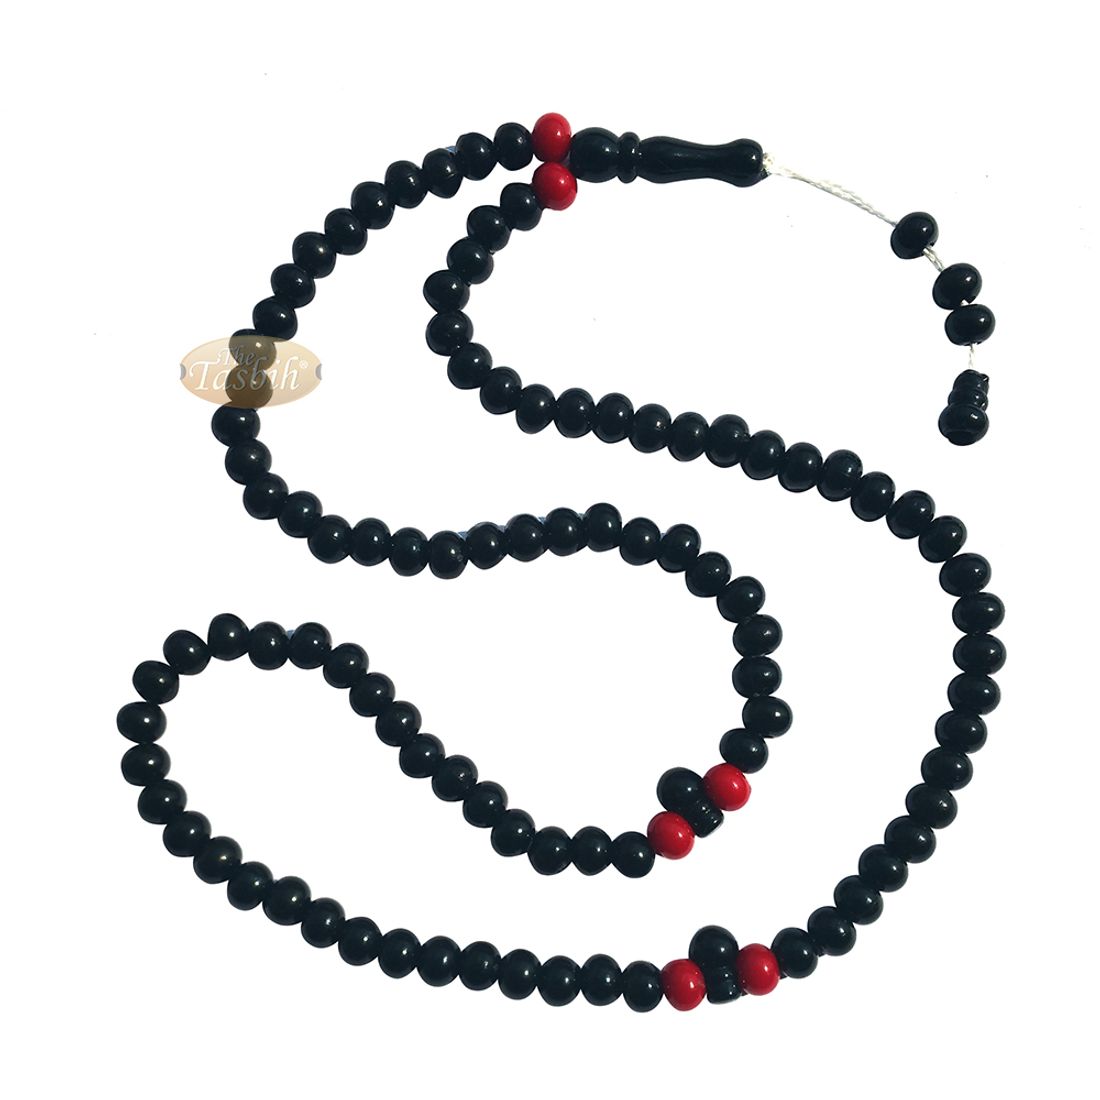 Small Black Plastic Tasbih 6x7mm Beads with Red Accent Beads